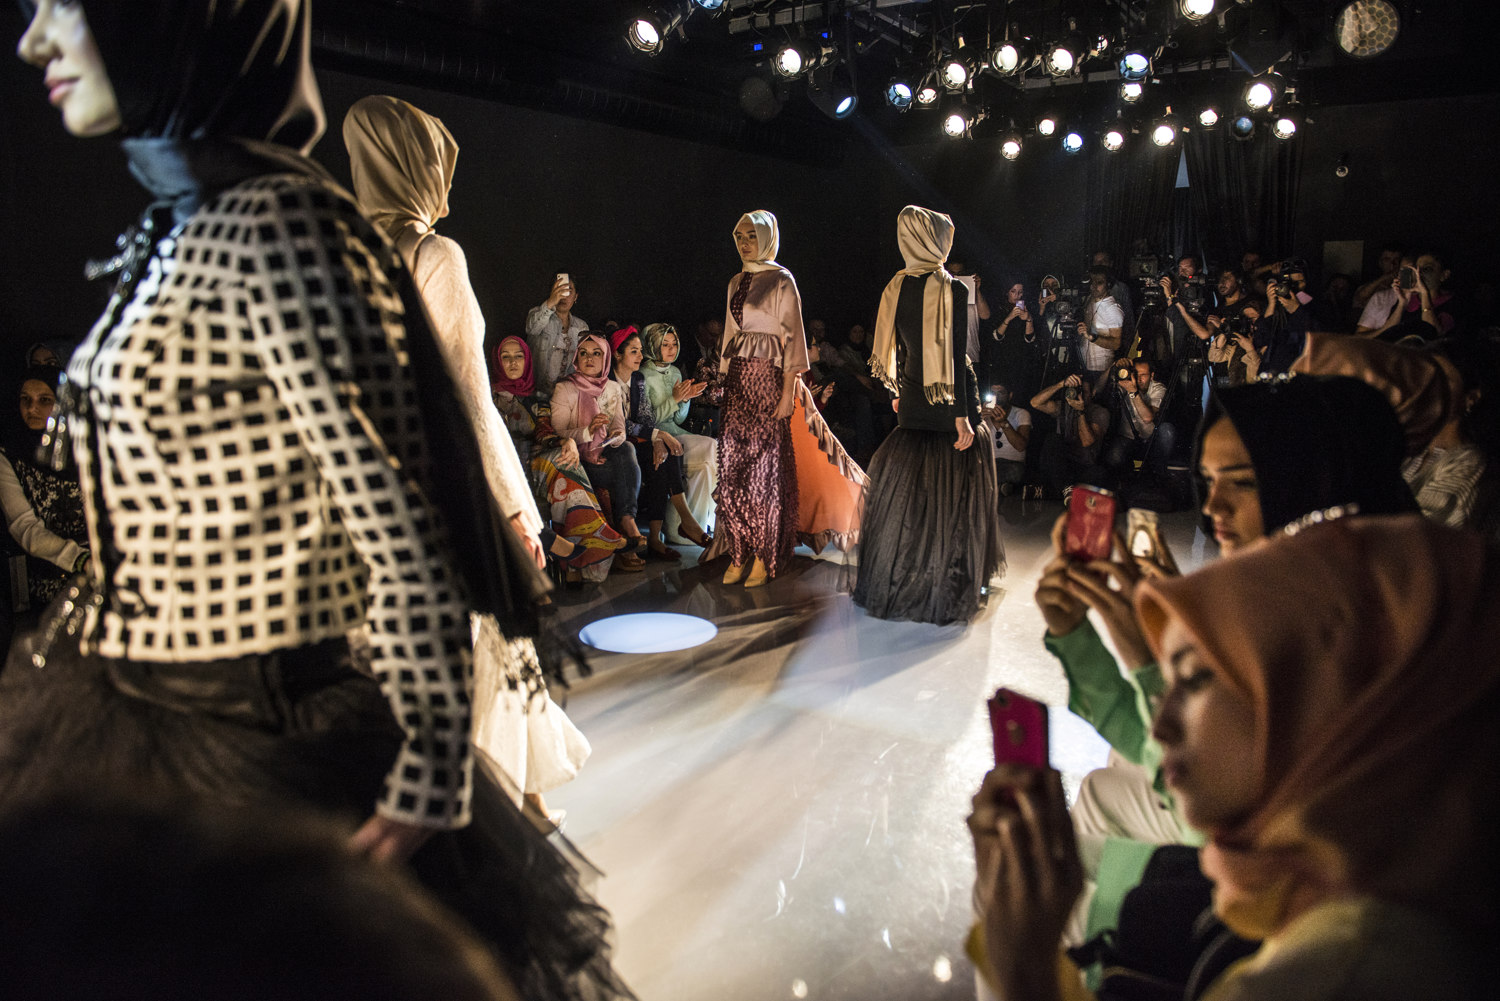  Modanisa, an online store of modest wear hosts its first fashion show in 2014 in Istanbul, Turkey. 